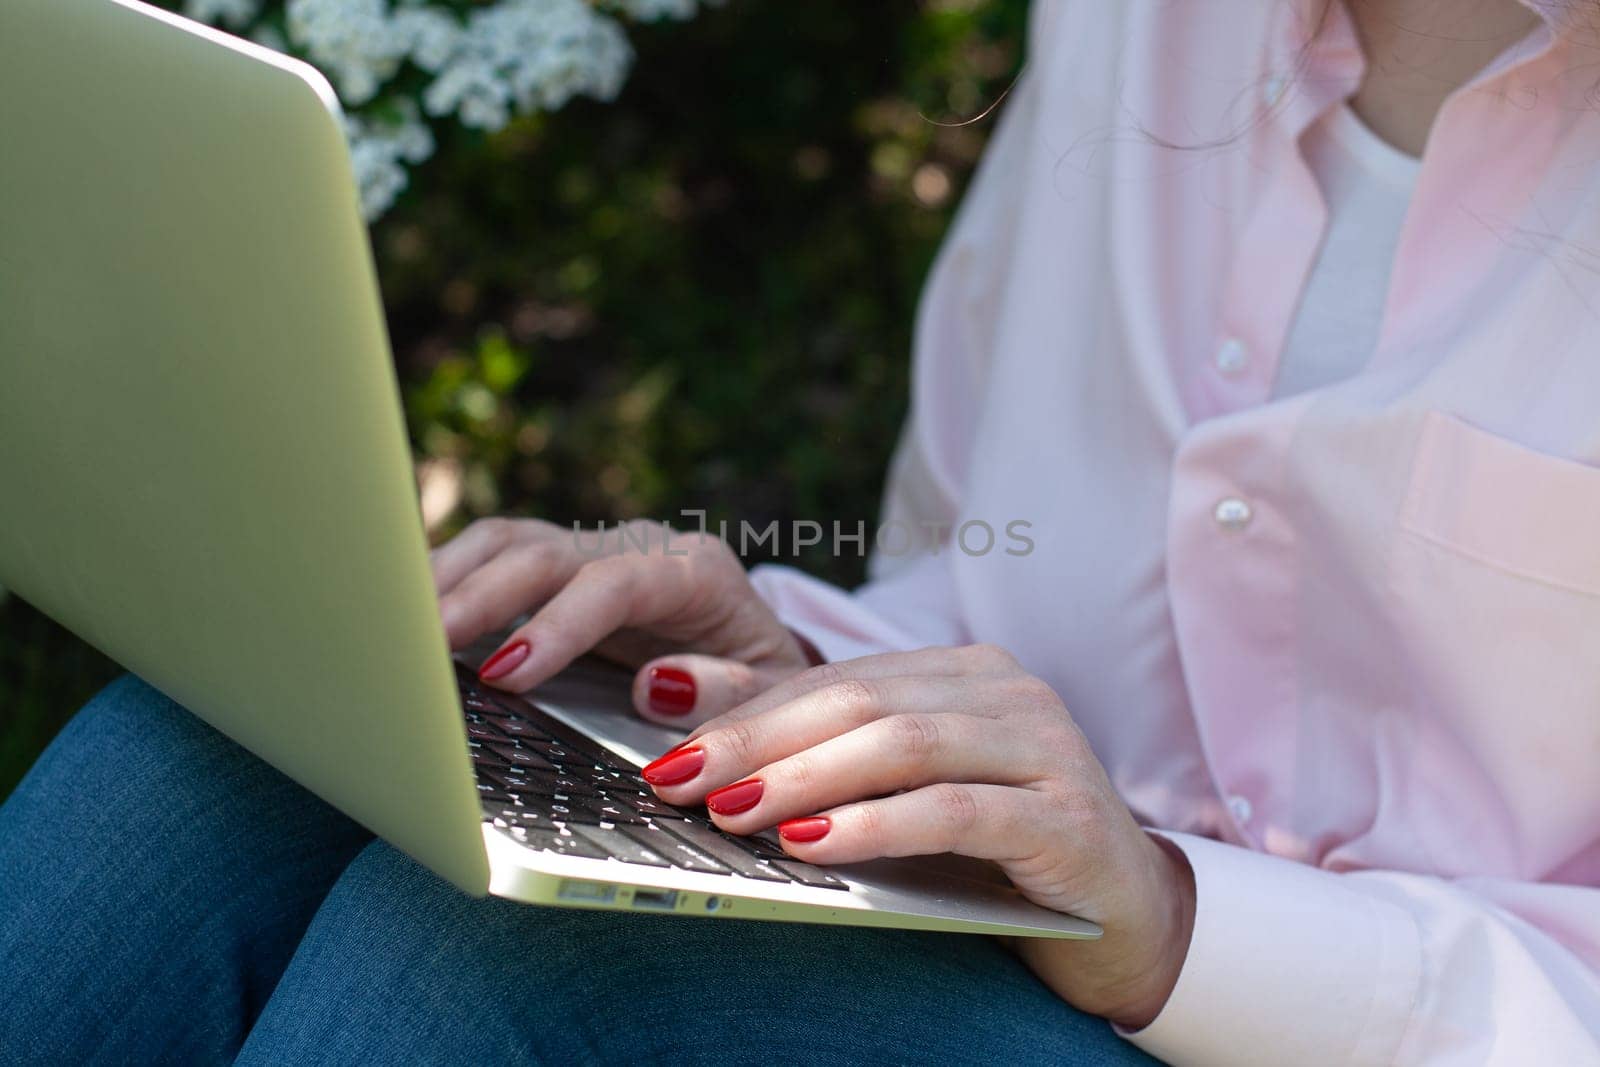 A girl in a pink shirt sits in the garden on the grass with a laptop, hands with a red manicure